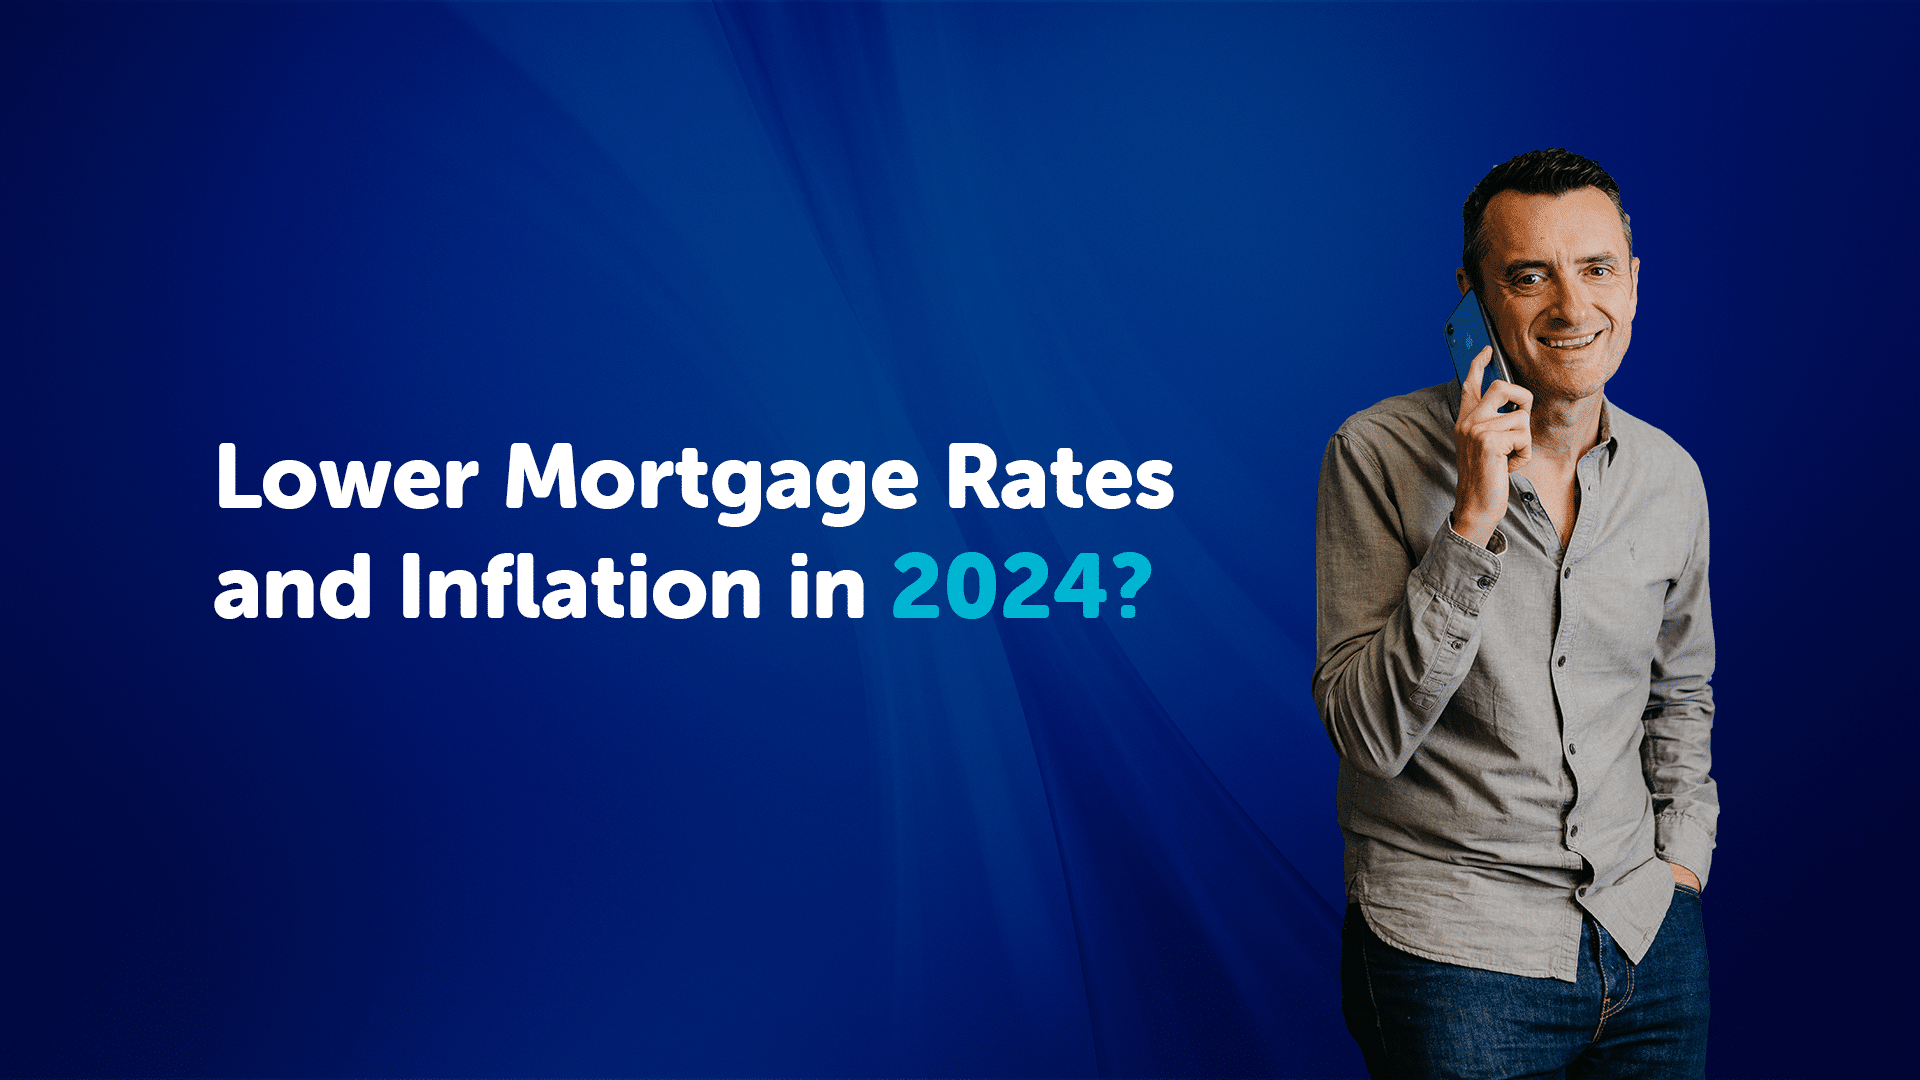 Lower Mortgage Rates and Inflation in 2024?